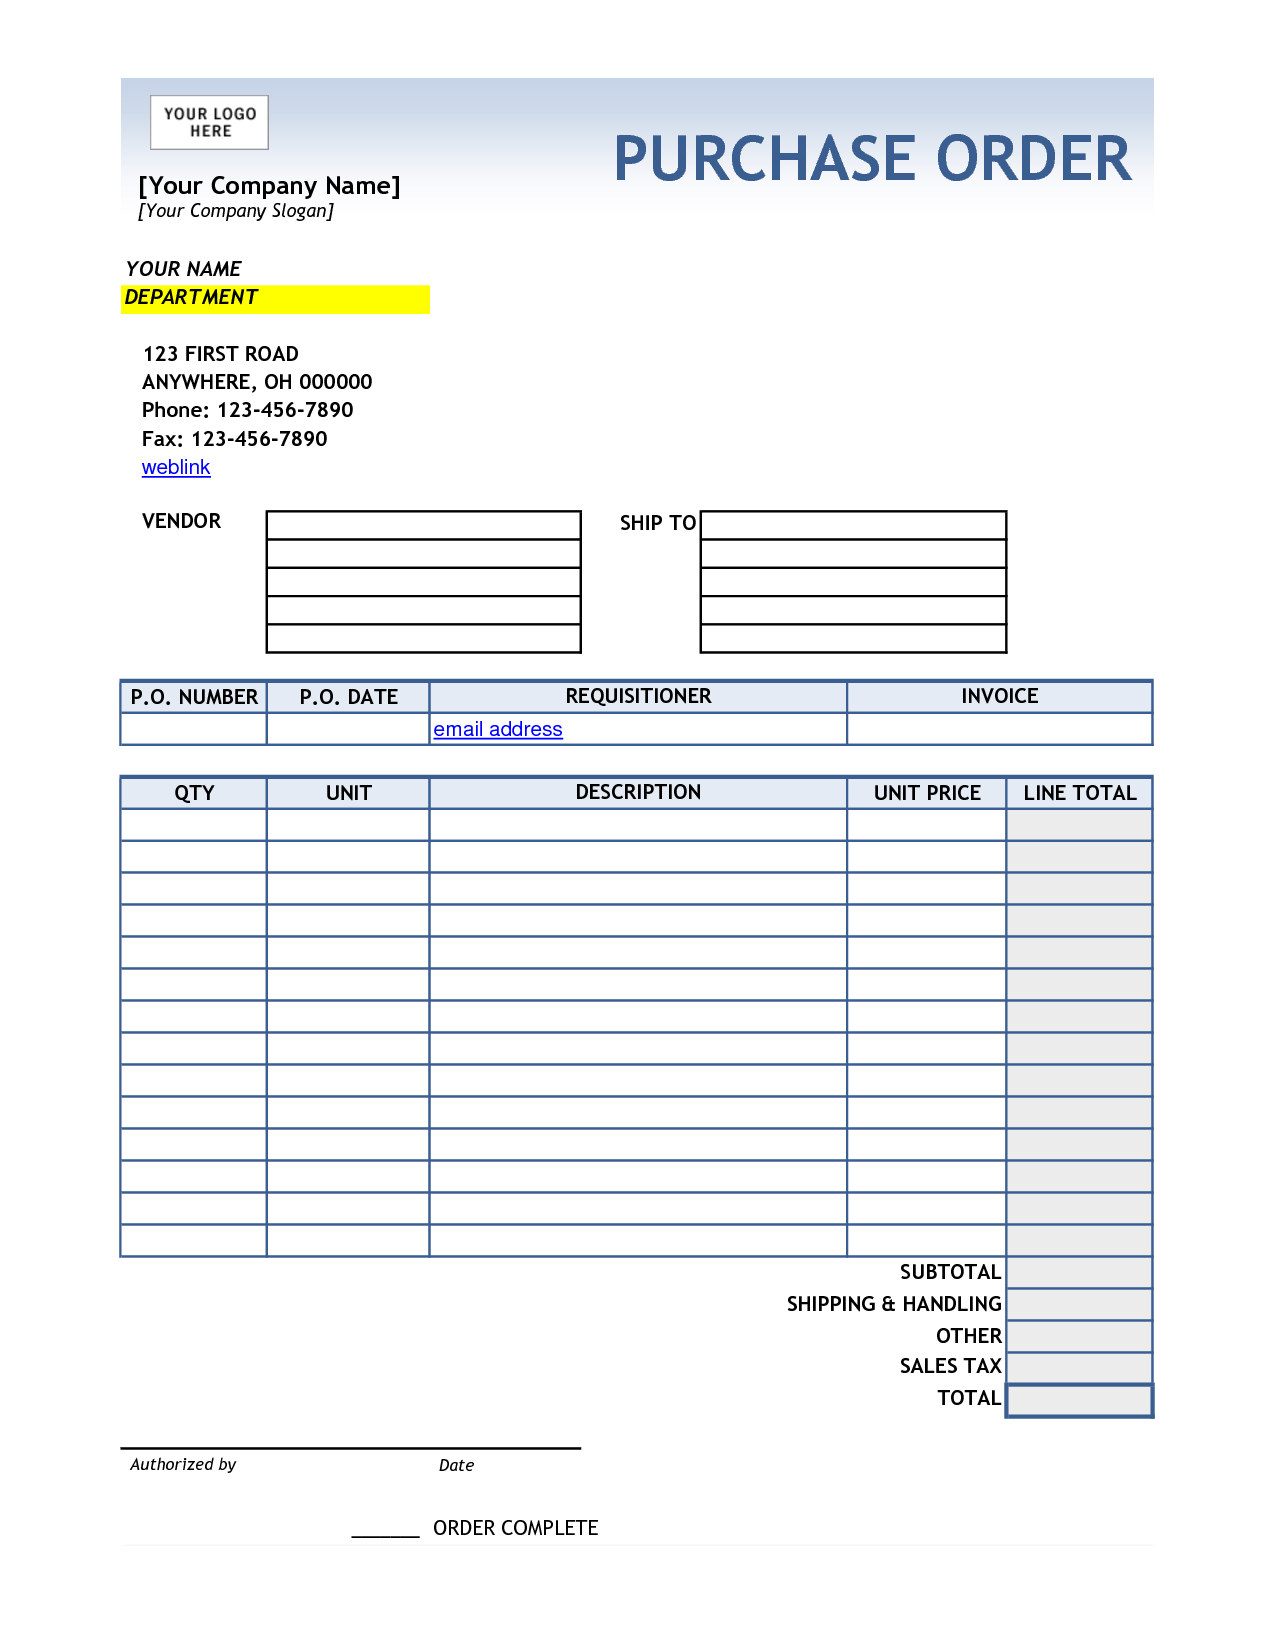 5 Best Images Of Free Printable Purchase Order Template Free 